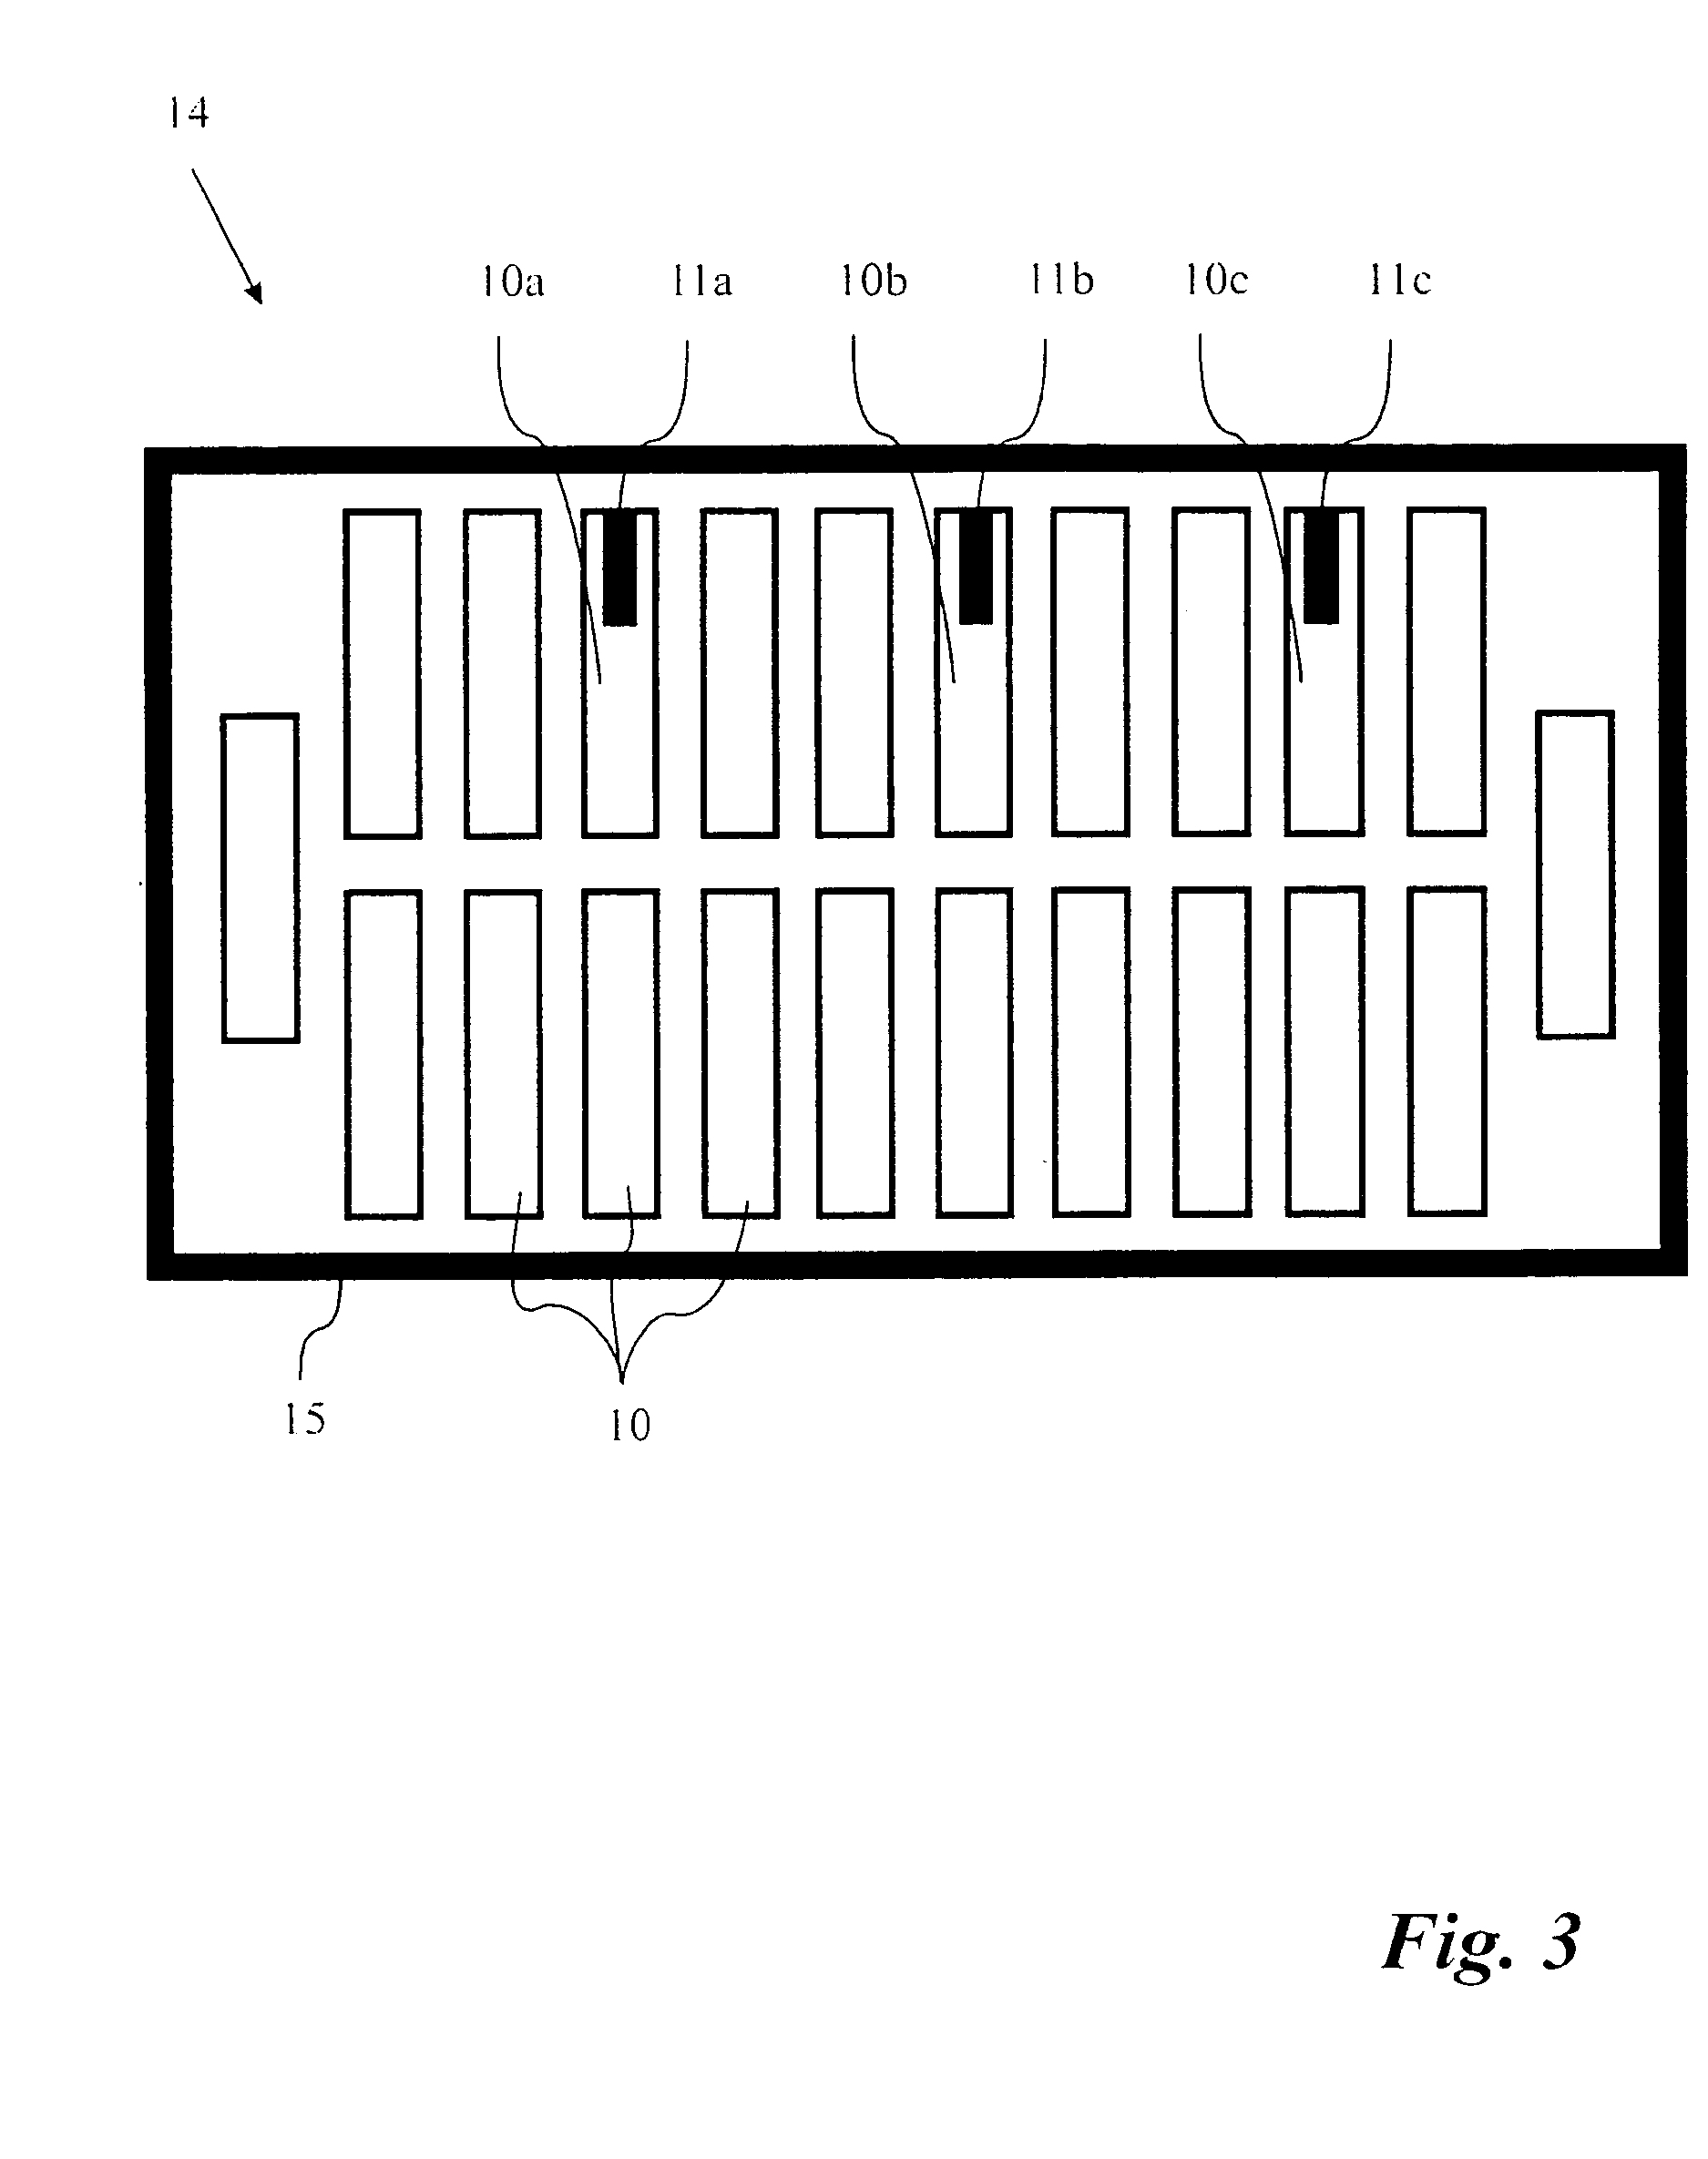 Integrated arrangement of optical fibers in a conductor